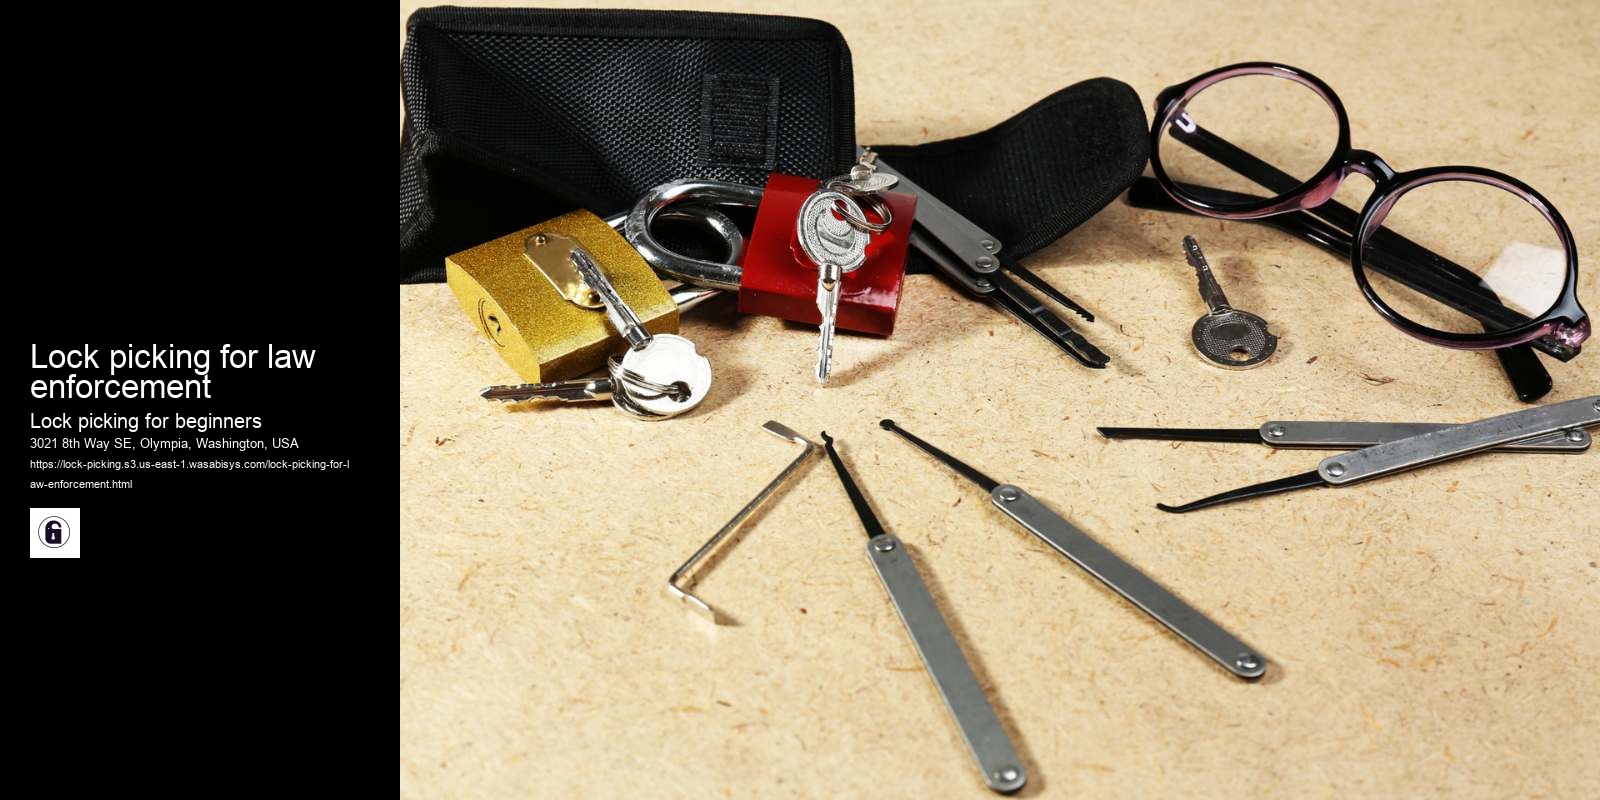 Lock picking for law enforcement